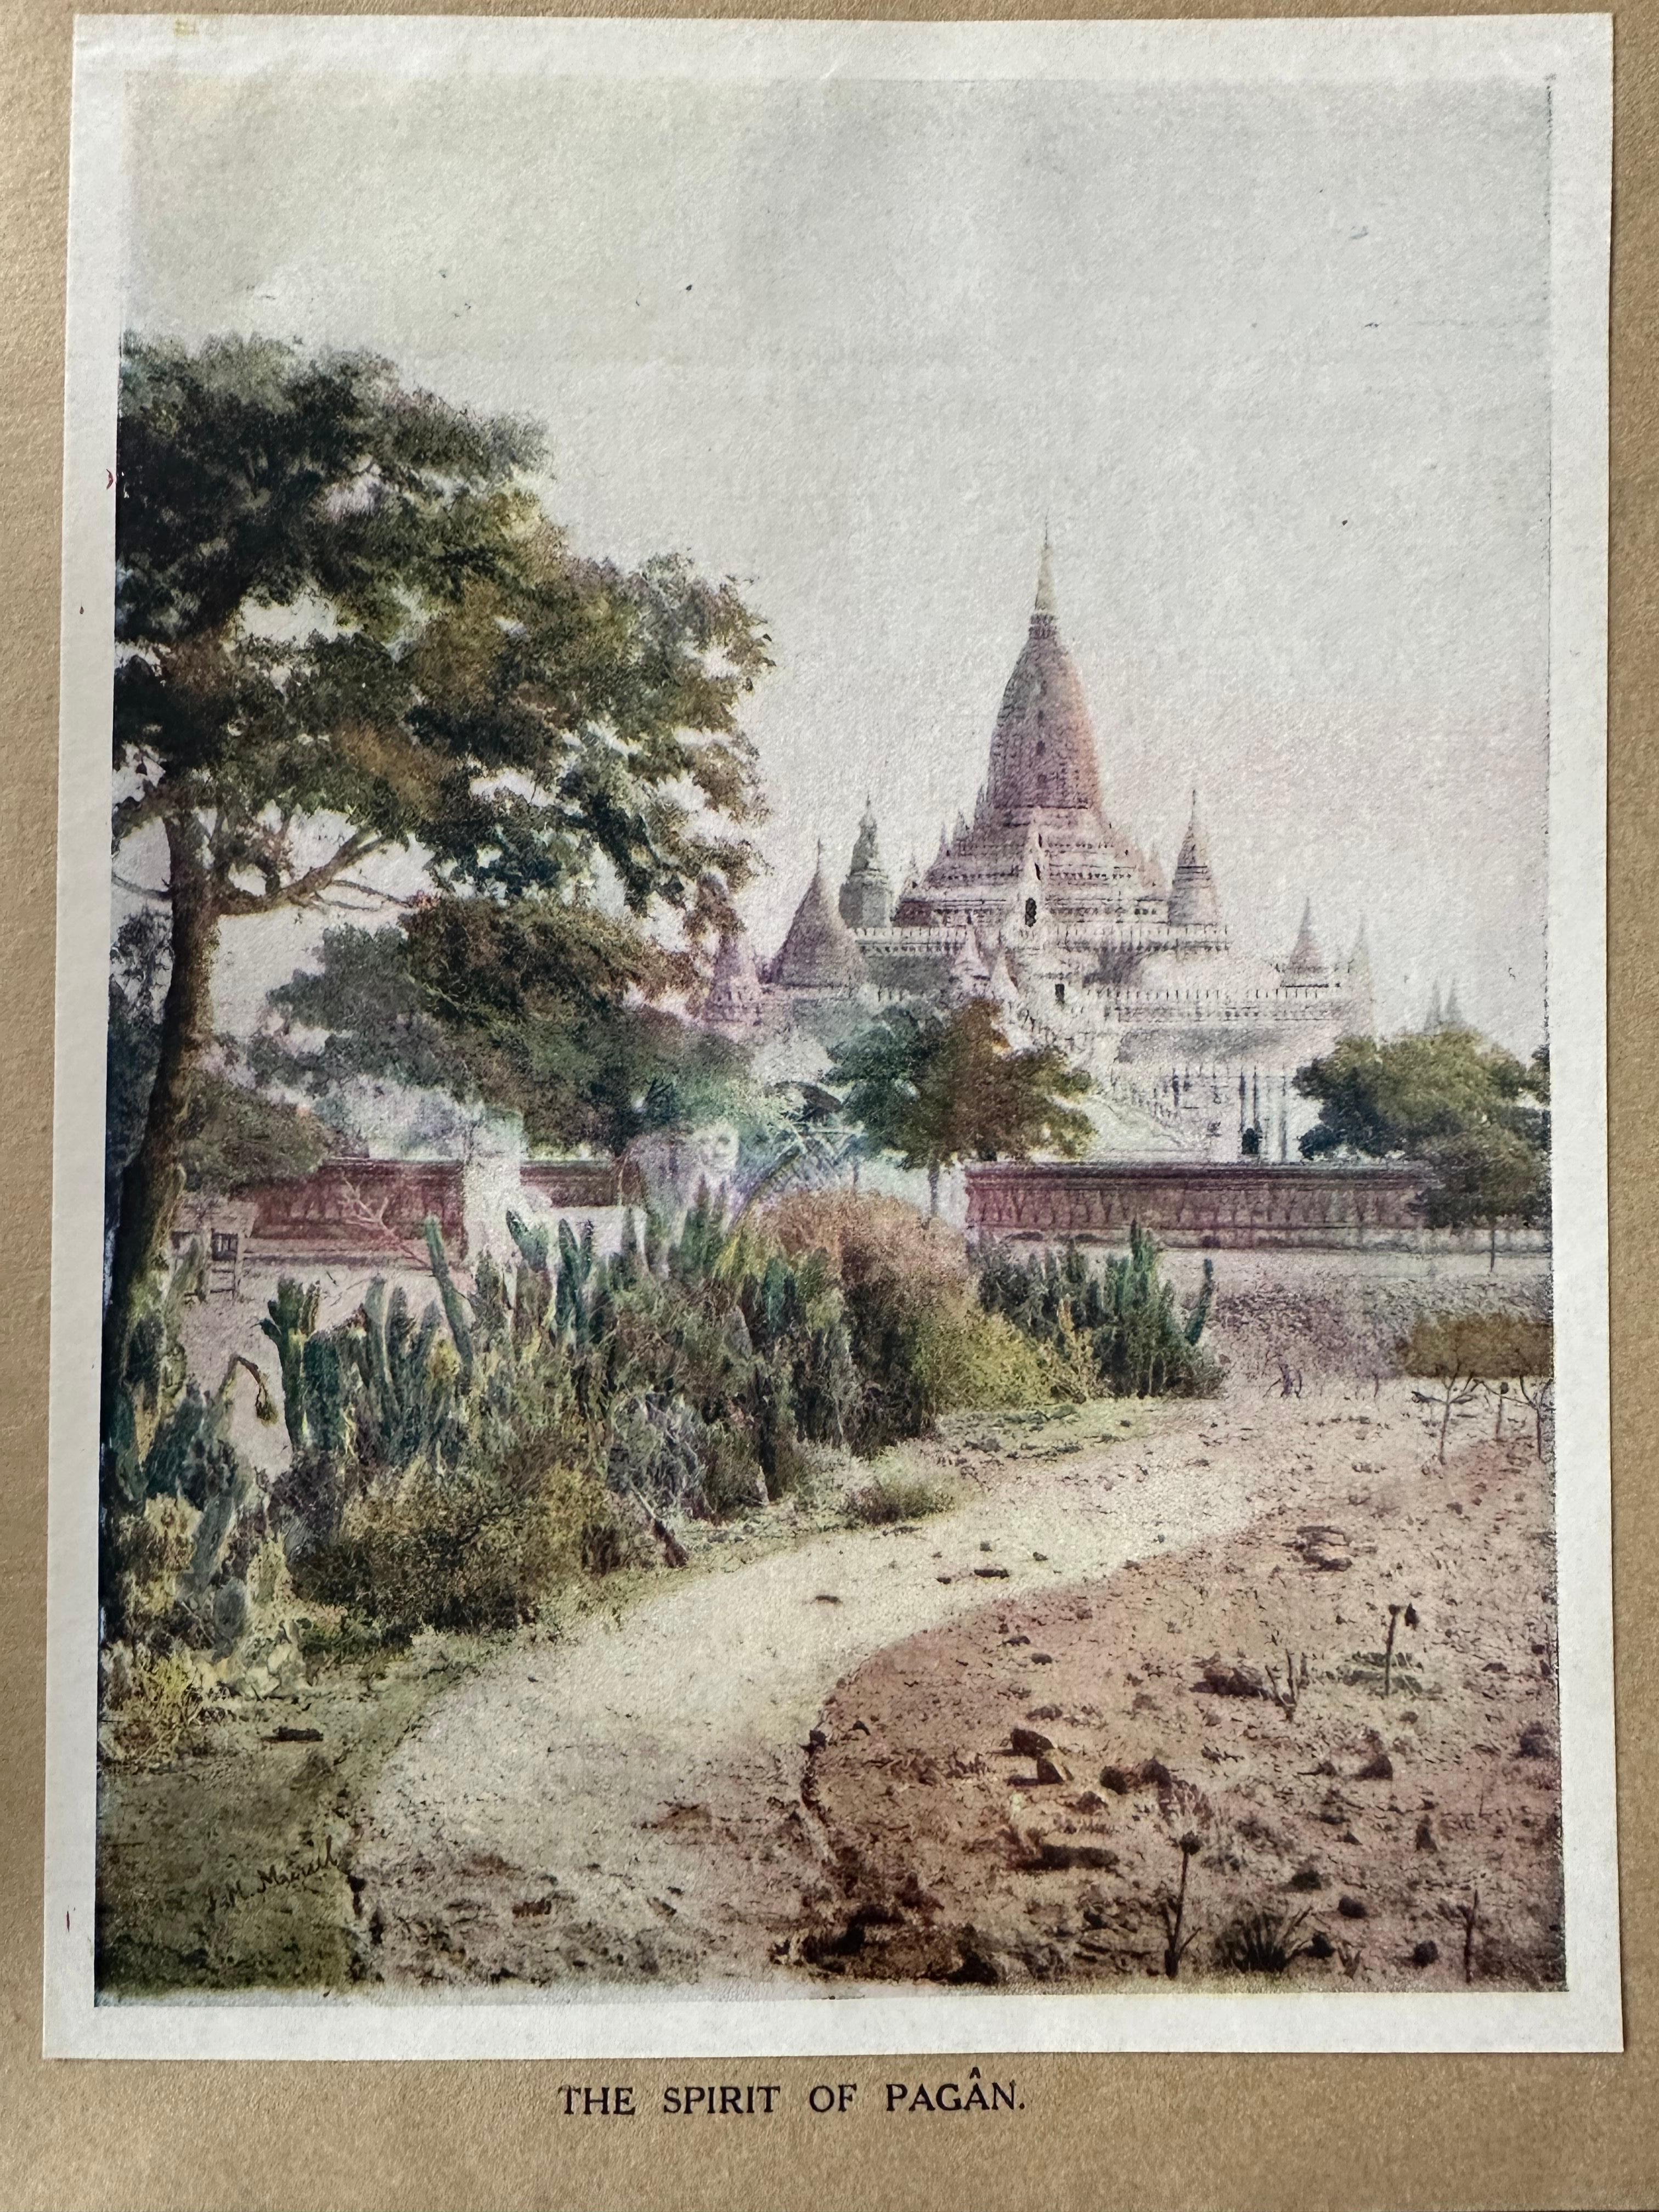 Title: Pictures from Lotus Land

Authors: Photographs by Mrs. Ernest Muriel (Frances Matilda Muriel); Verses described by R.C.J. Swinhoe (Rodway Charles John Swinhoe)

Publisher: Rowe & Co., Rangoon
Publication Year: 1910 (with an estimated range of